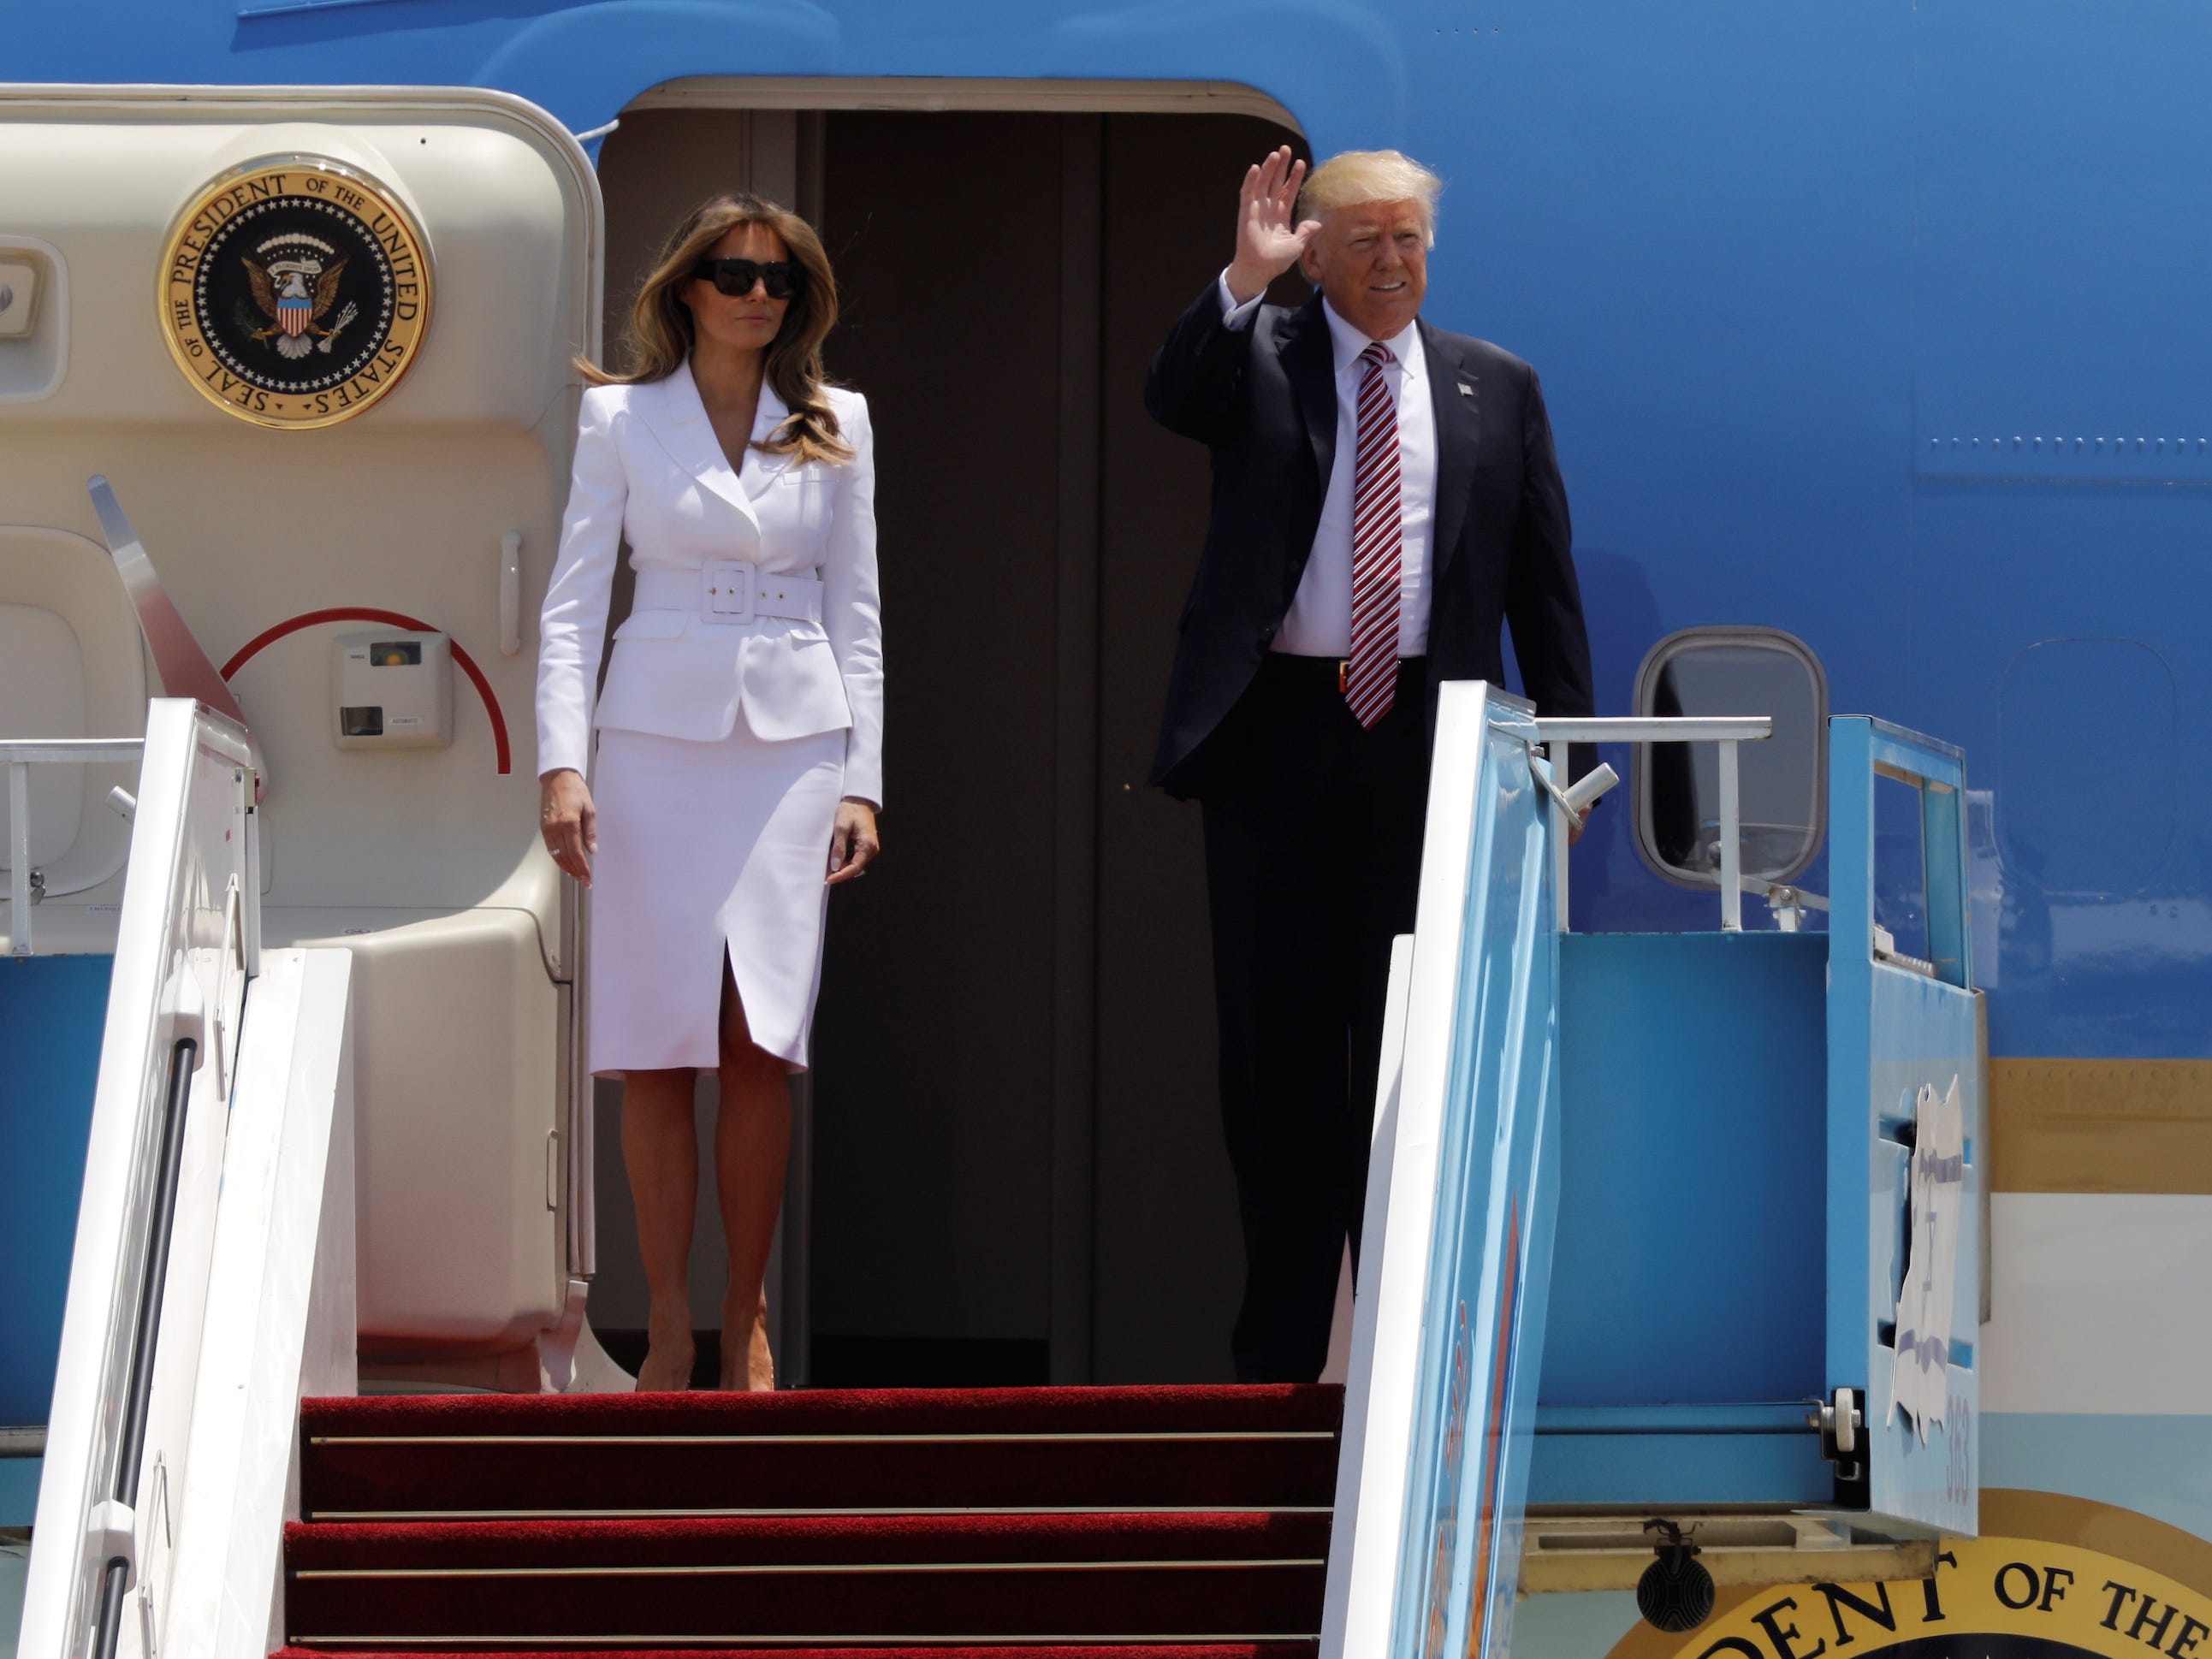 <p>During a trip to Israel in May 2017 — Donald Trump's first trip abroad since taking office — much was made of the <a href="https://www.businessinsider.com/melania-yanks-hand-away-from-donald-trump-2017-5">body language</a> between the pair when Trump appeared to swat her husband's hand away.</p>